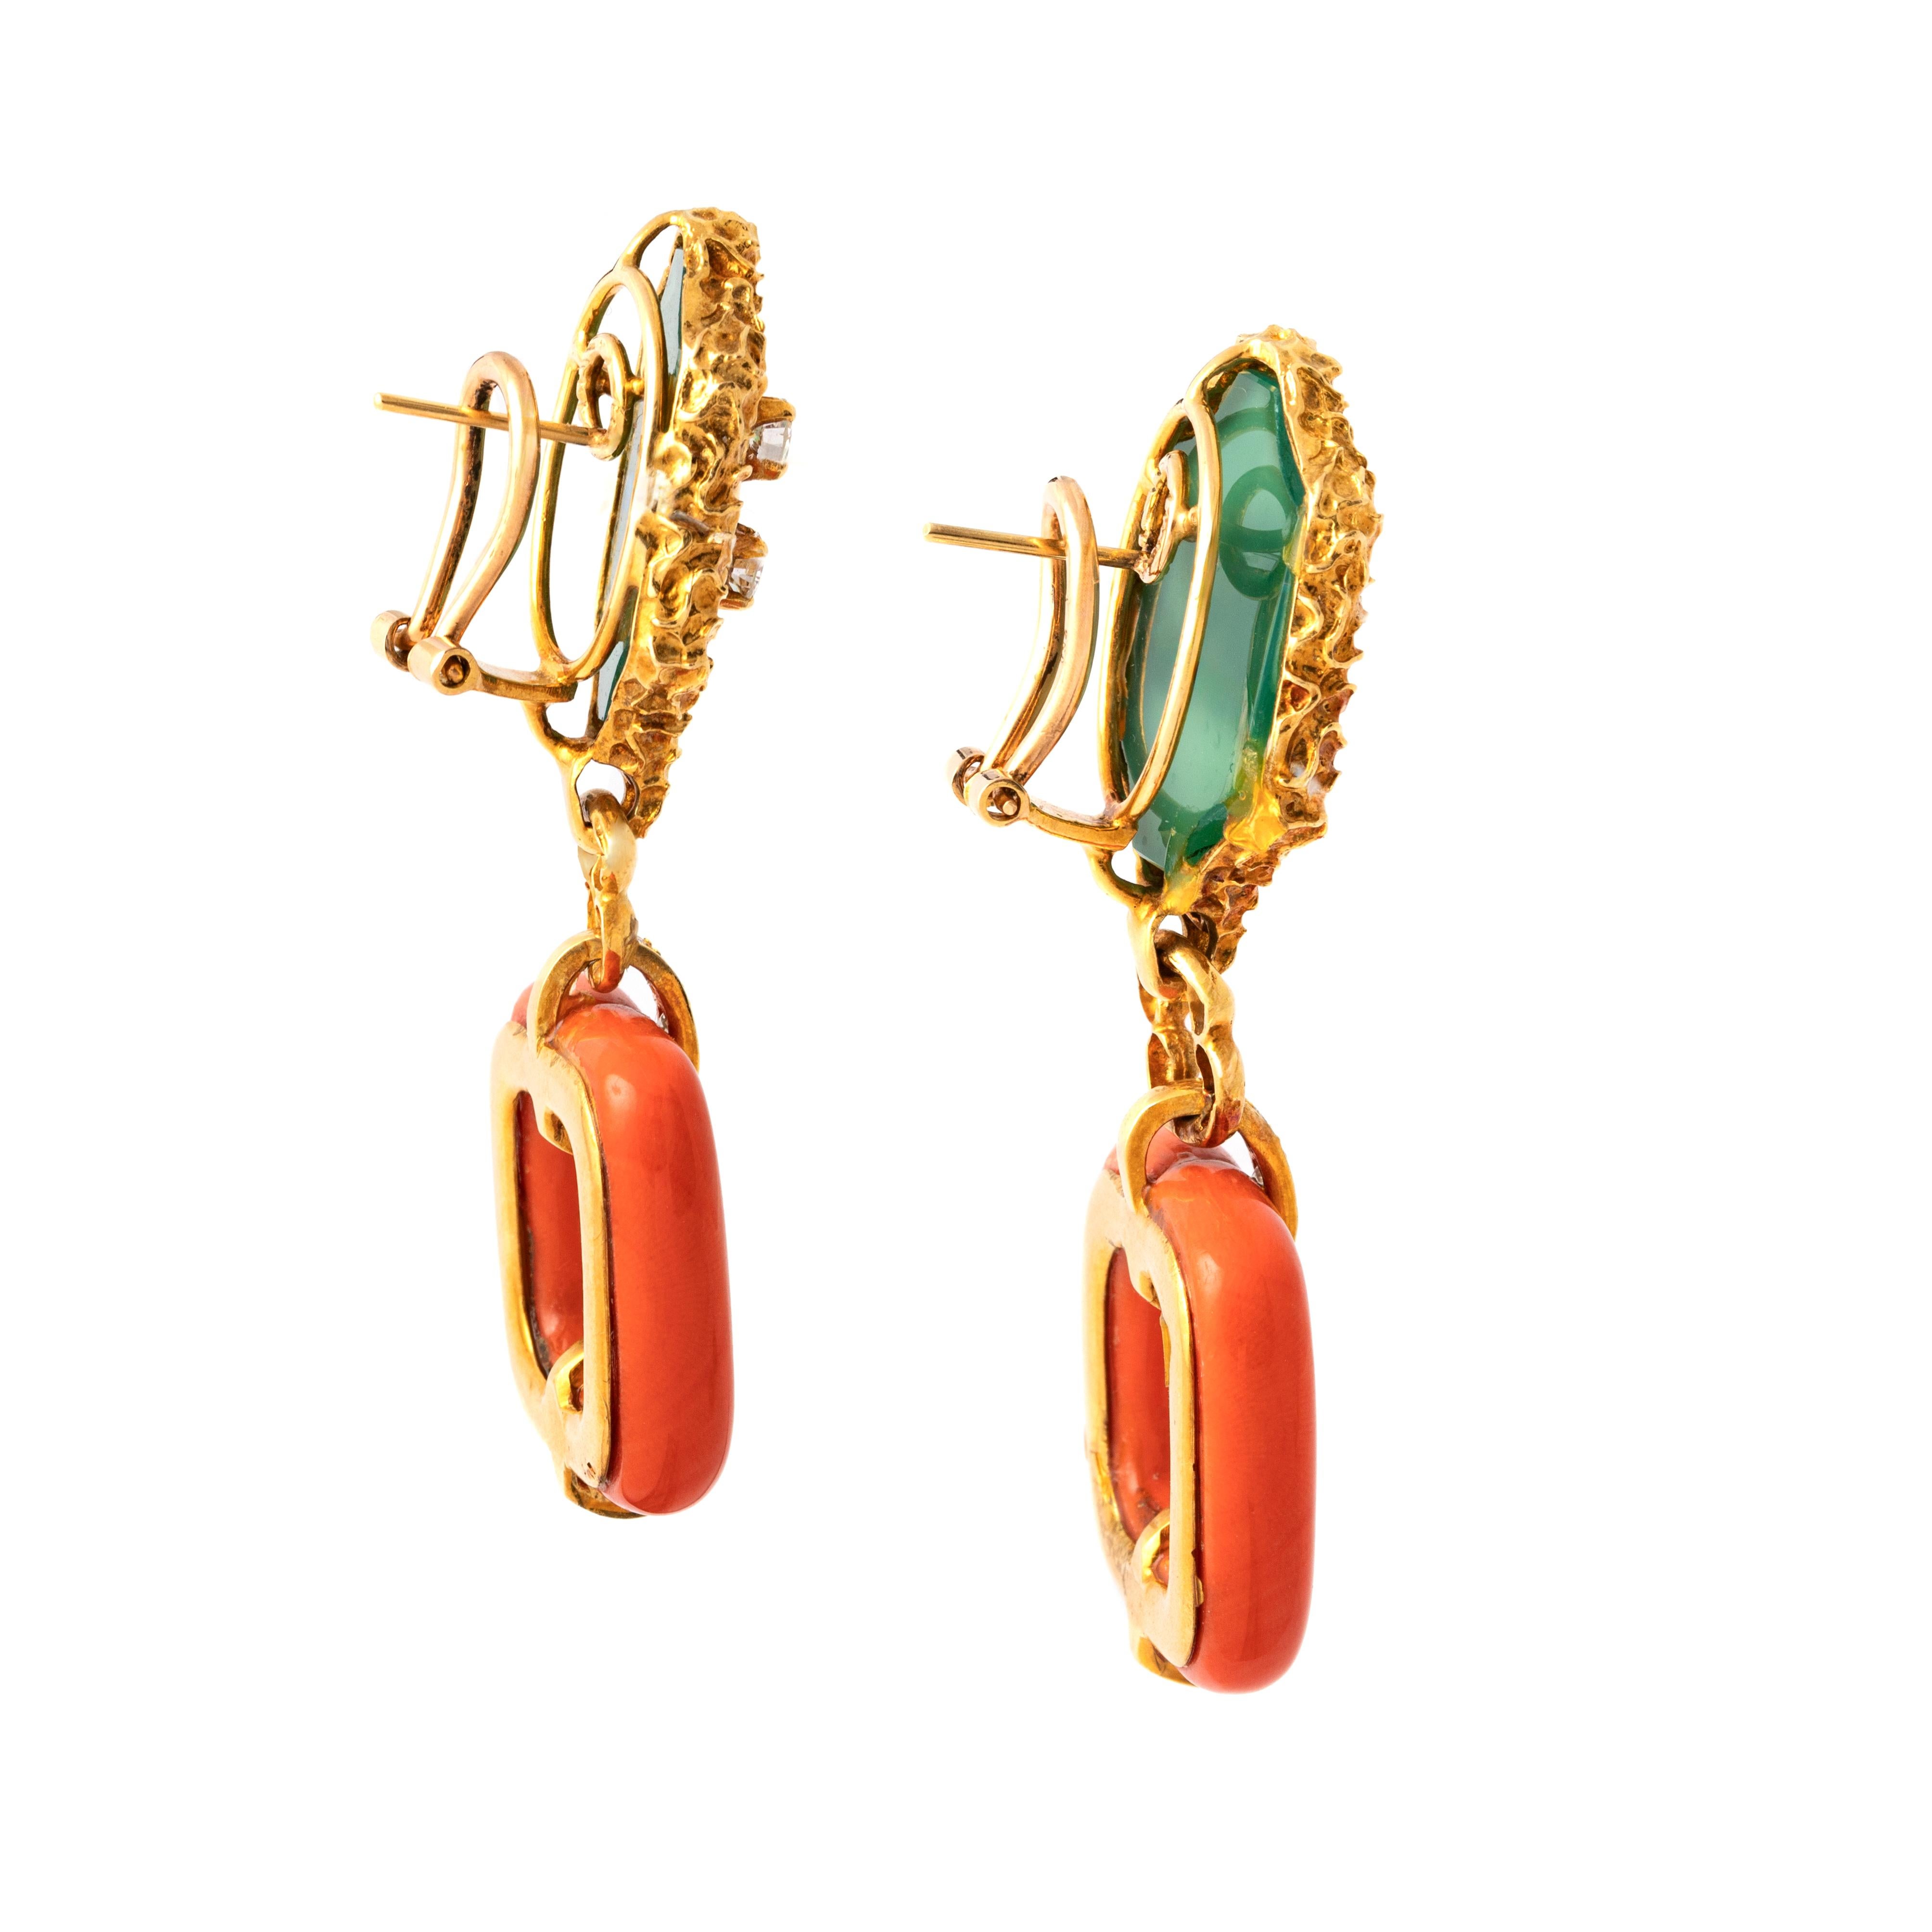 Ear pendants in natural corail, diamond and green hard stone (not tested) on yellow gold. 
Circa 1970.

Total hight: 6.00 centimeters.
Total width: 2.10 centimeters.

Total weight: 33.18 grams.
